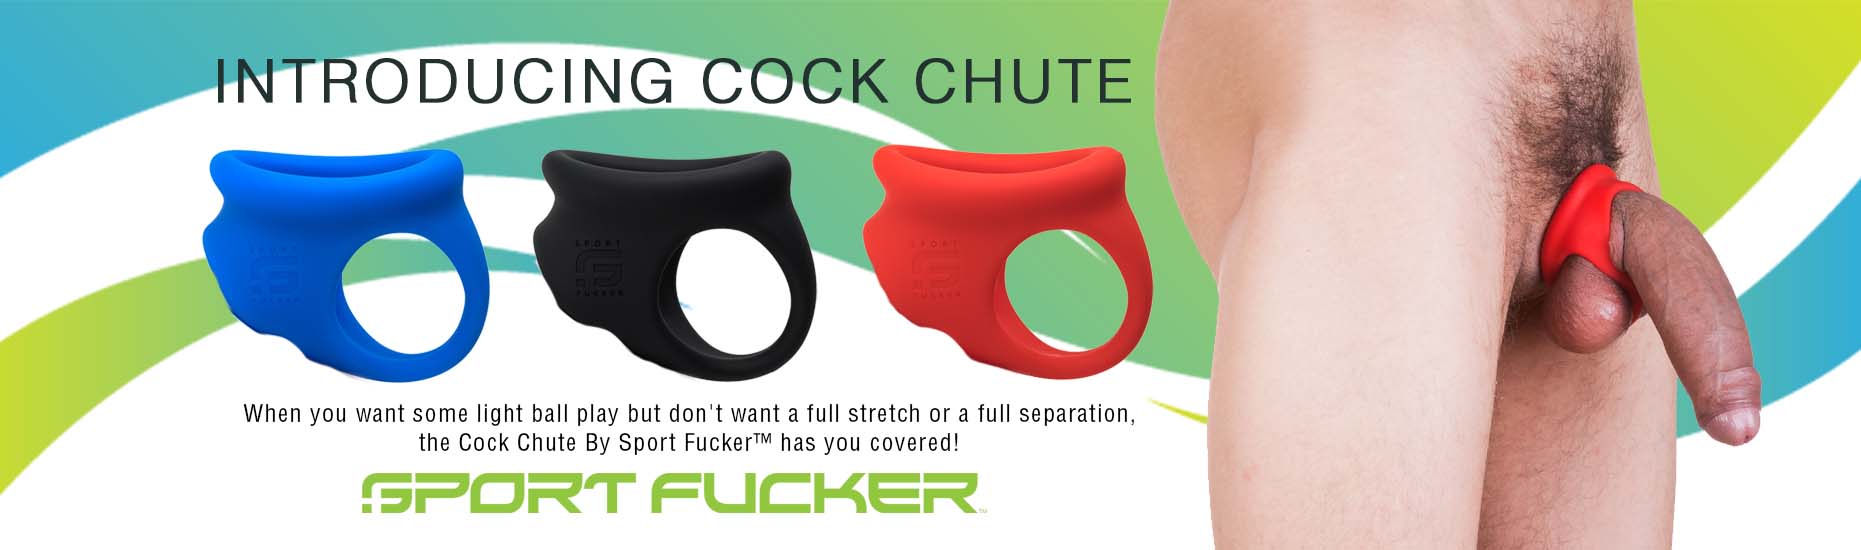 Introducing Cock Chute by Sport Fucker™